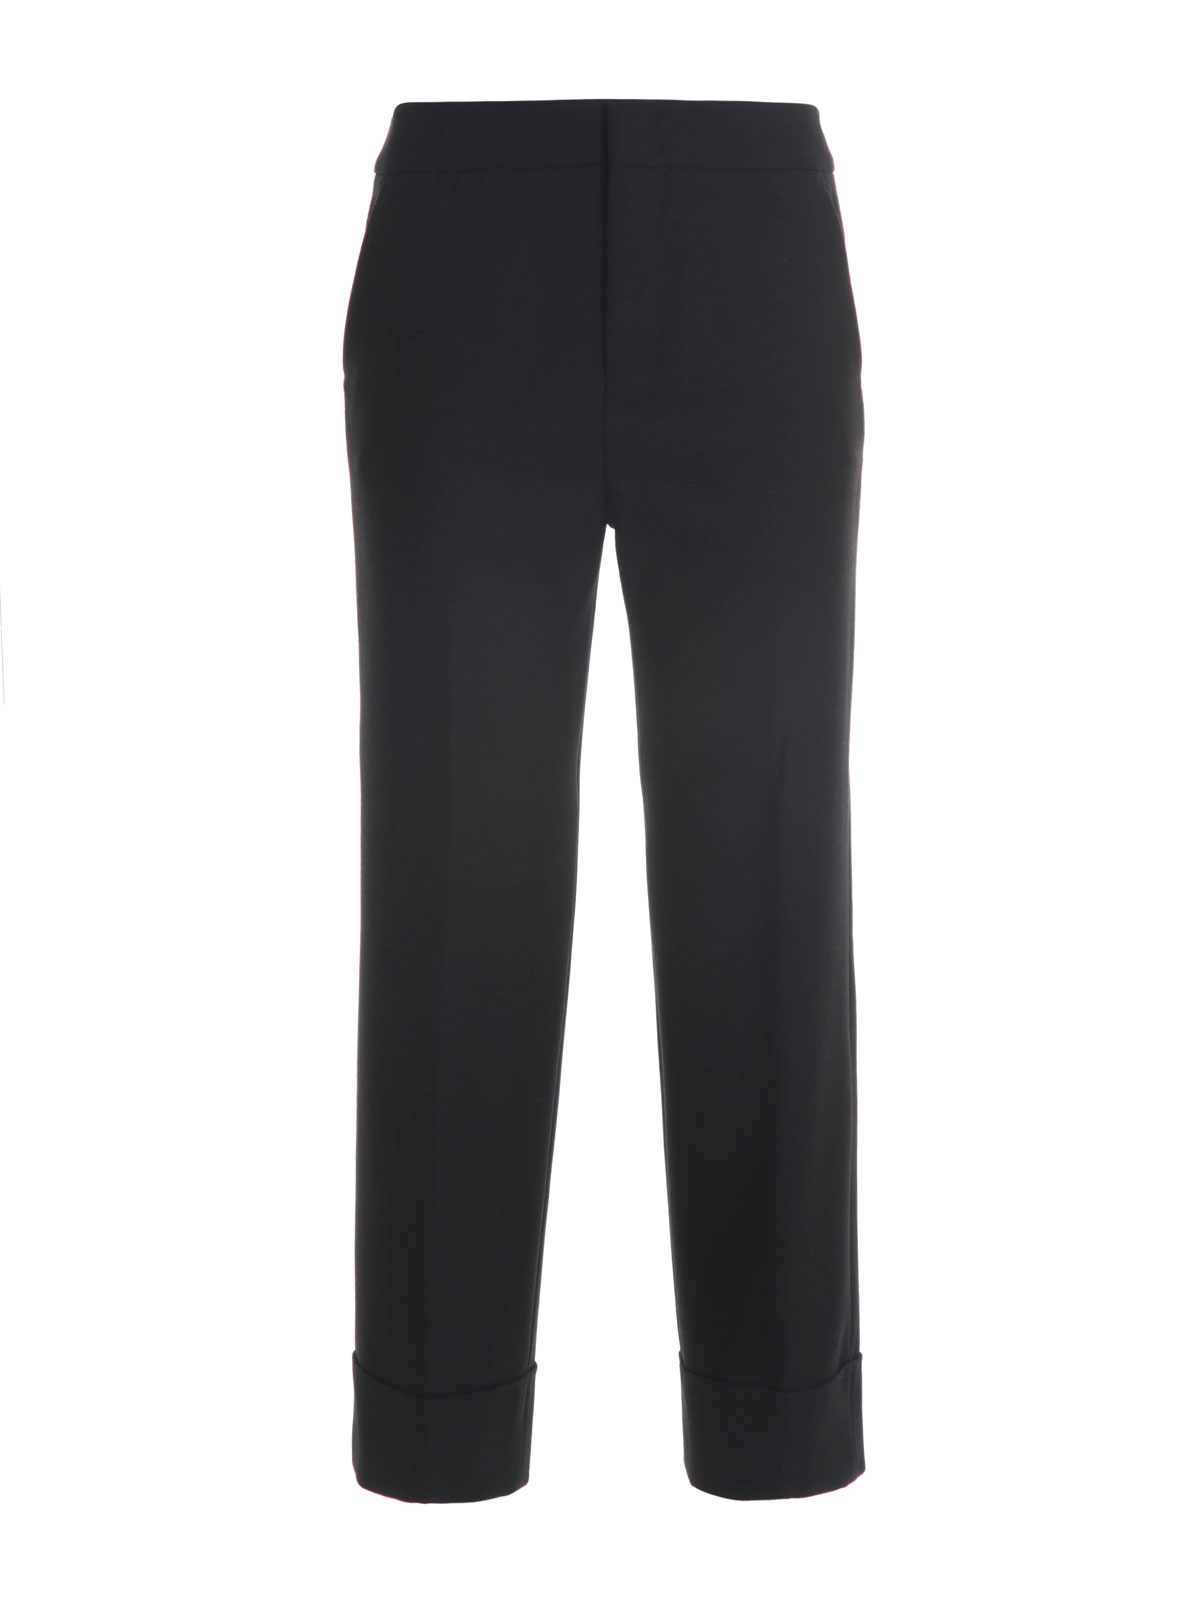 Tailored & Formal trousers Pt Torino - Maxi turn-ups formal culottes ...